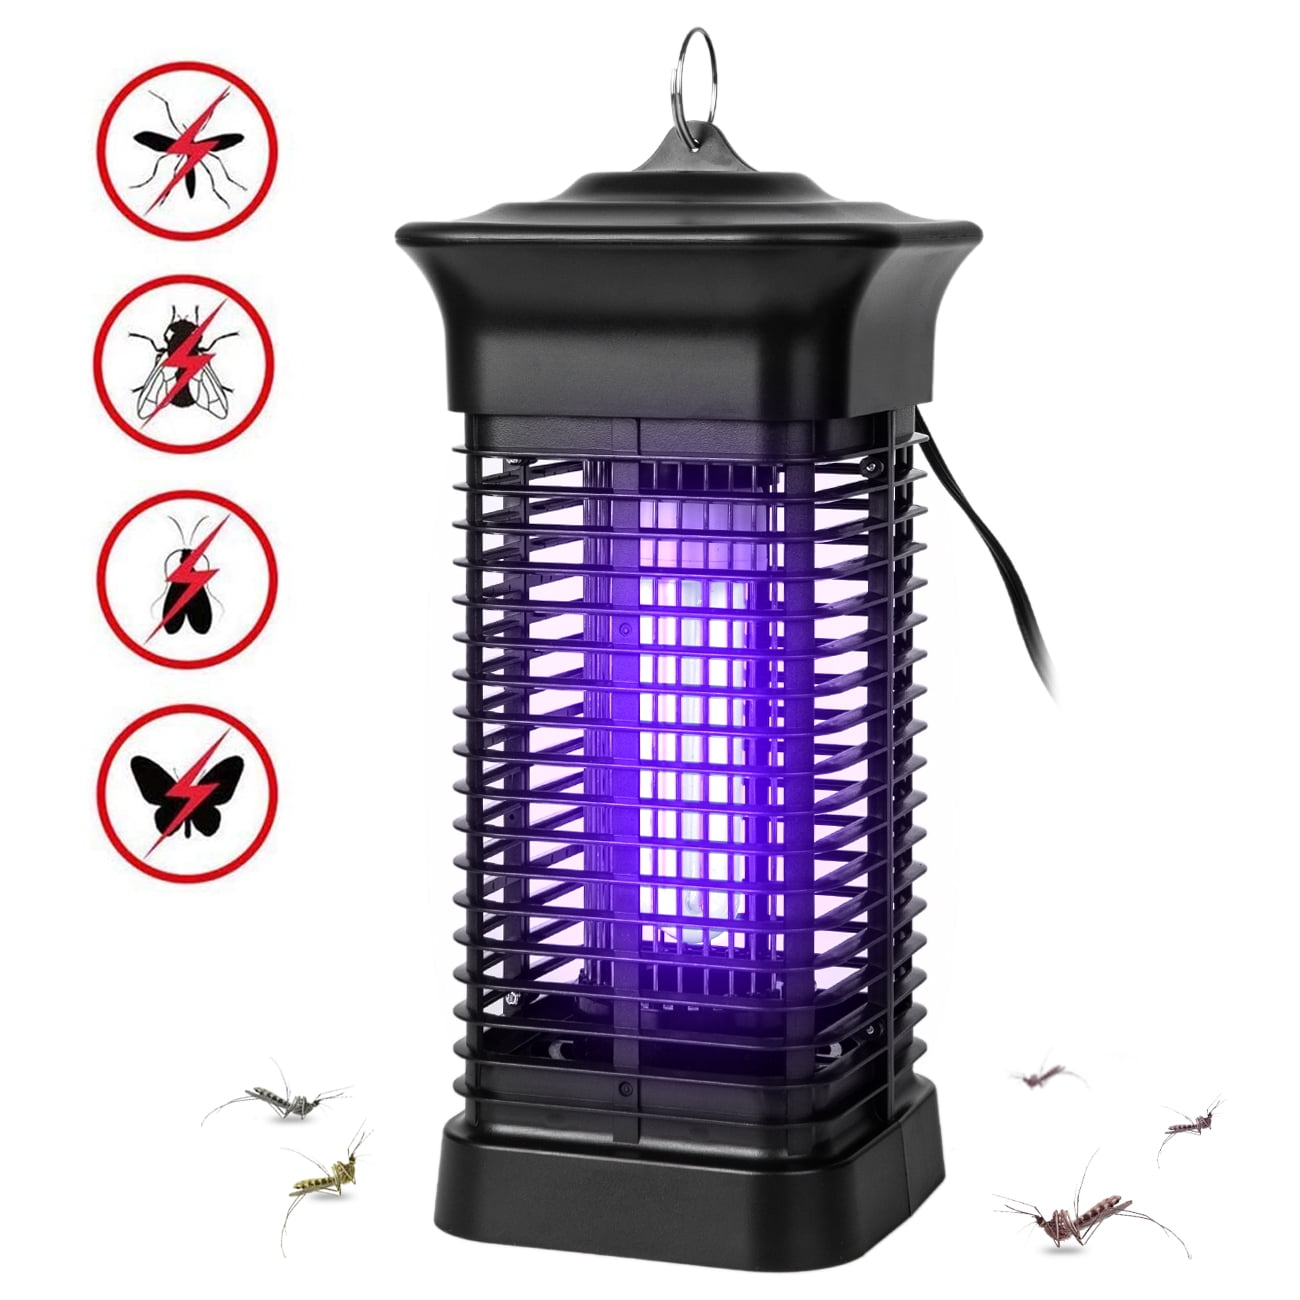 Electric Mosquito Killer,Bug Zapper with 120V UV Tube,Pest Control,Insect Killer Control with Stand,360°Coverage Fly Zapper,Mosquito Trap,Radiationless,for Home and Commercial Use 